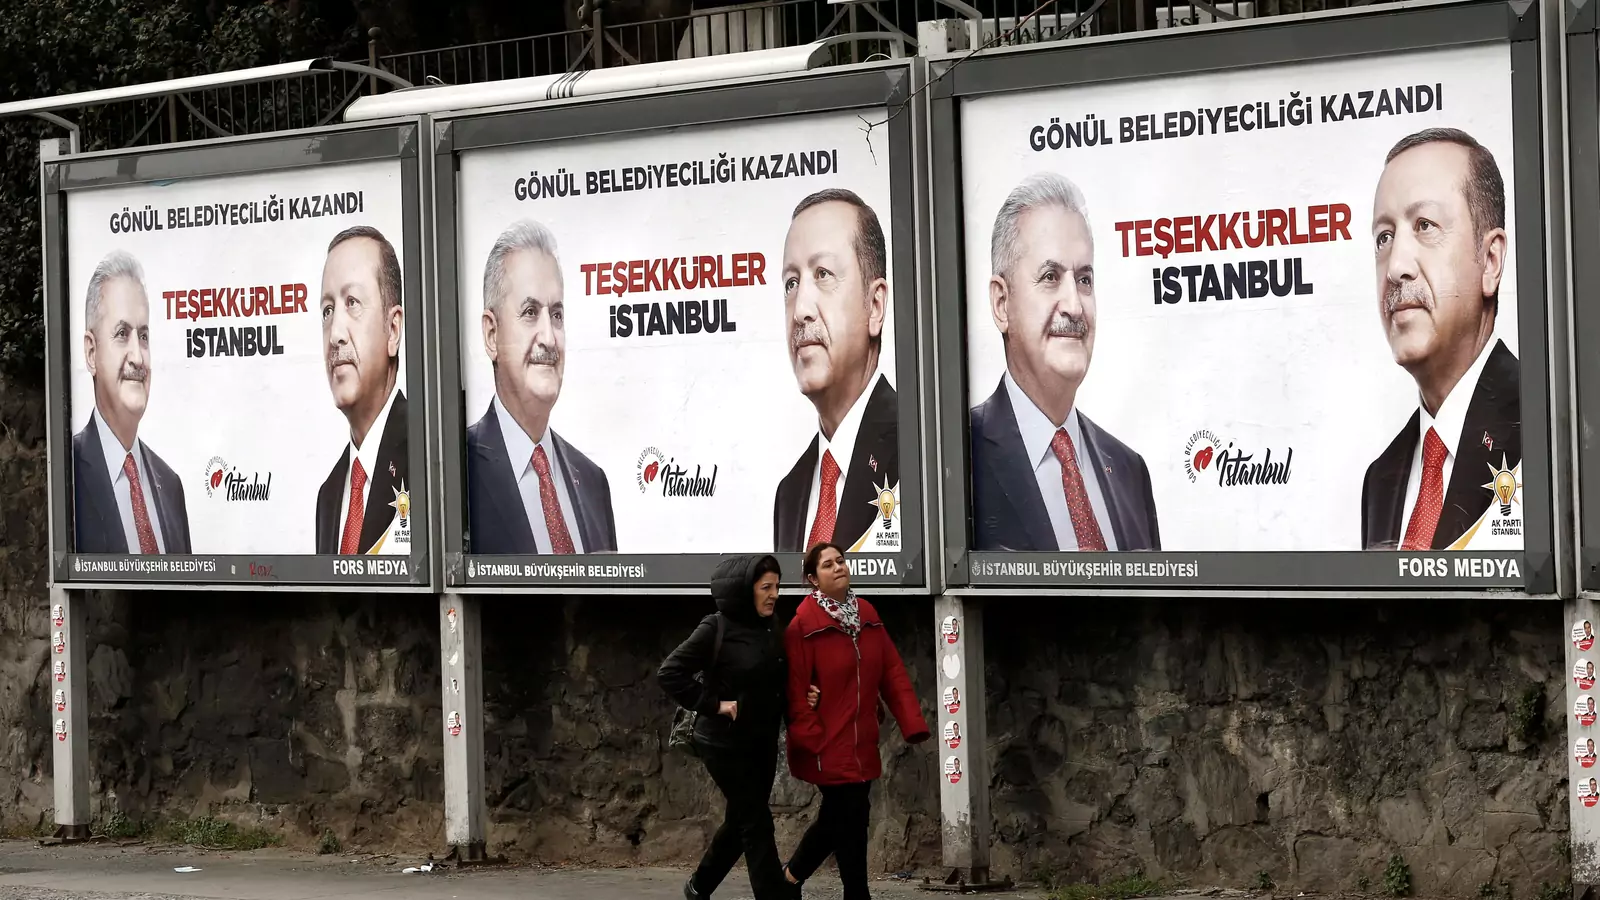 People walk past by AK Party billboards with pictures of Turkish President Tayyip Erdogan and mayoral candidate Binali Yildirim in Istanbul, Turkey, April 1, 2019.